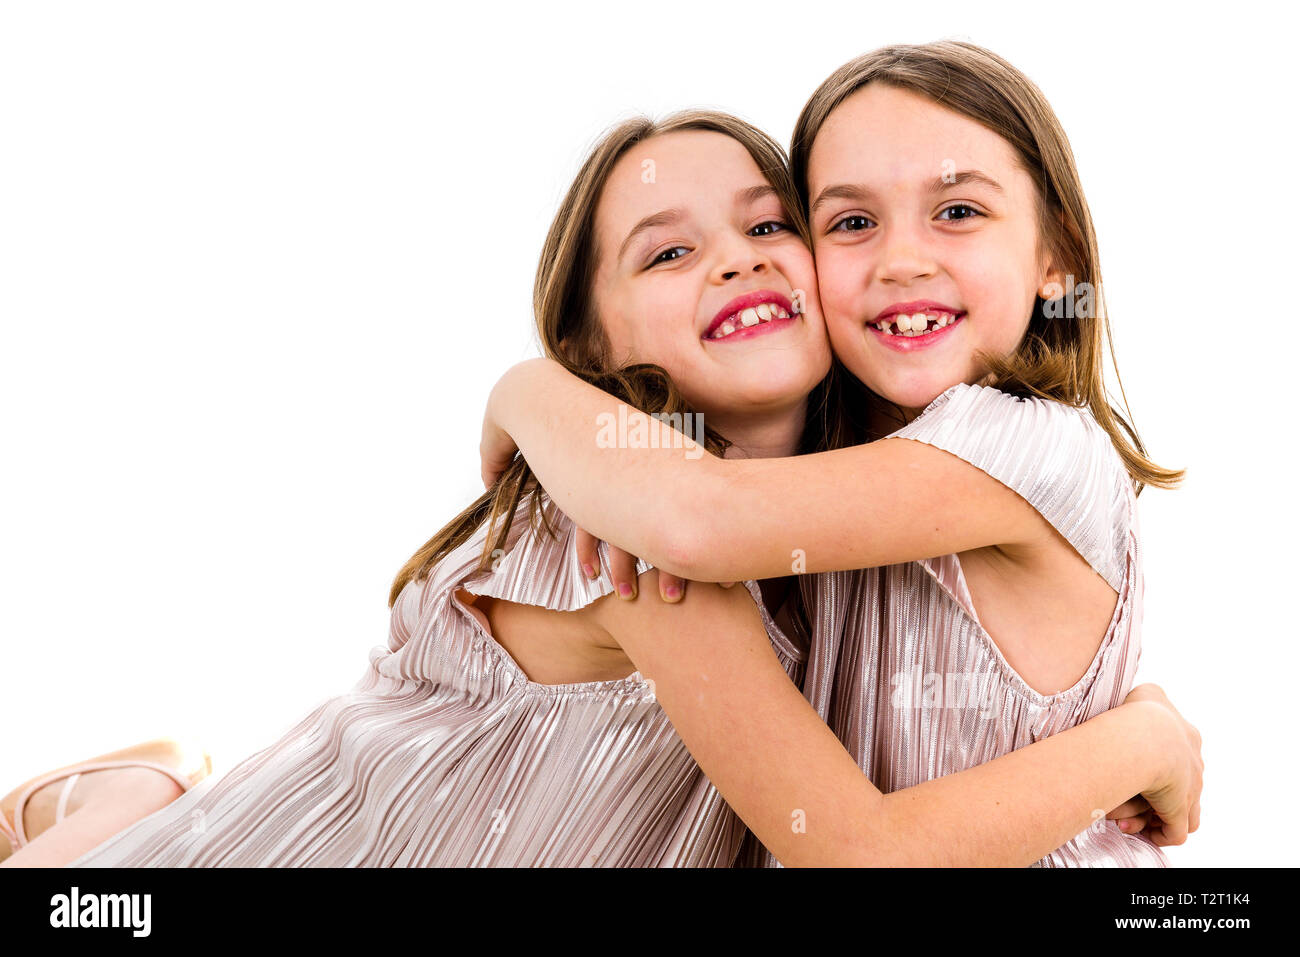 Identical Twin Girls Sisters Are Posing For The Camera Happy Twin Sisters In Dresses Looking At